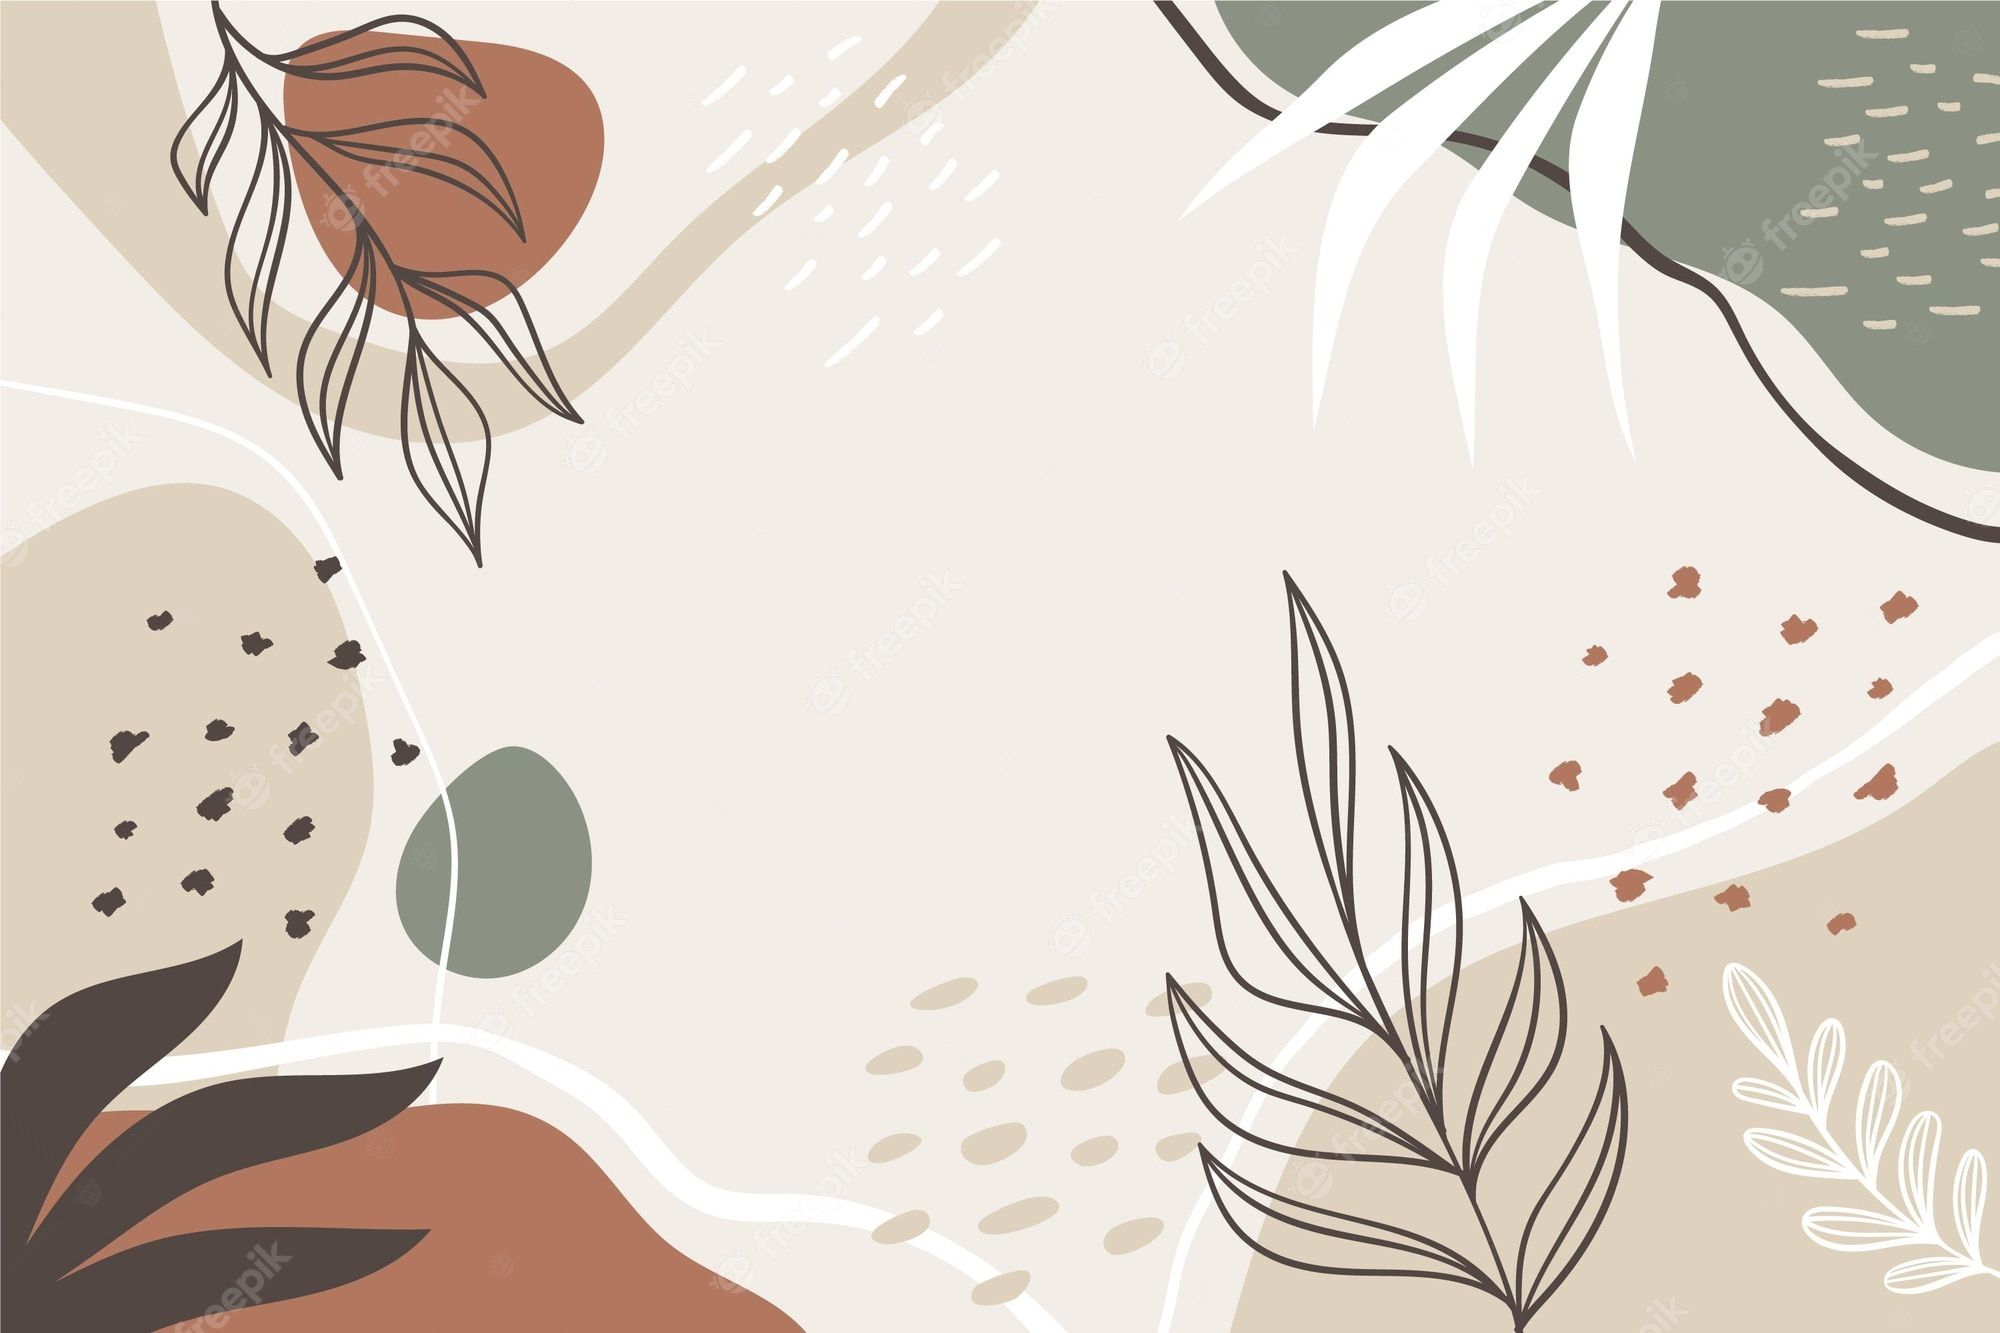 Aesthetic background with plant elements in brown and beige colors - Illustration, minimalist